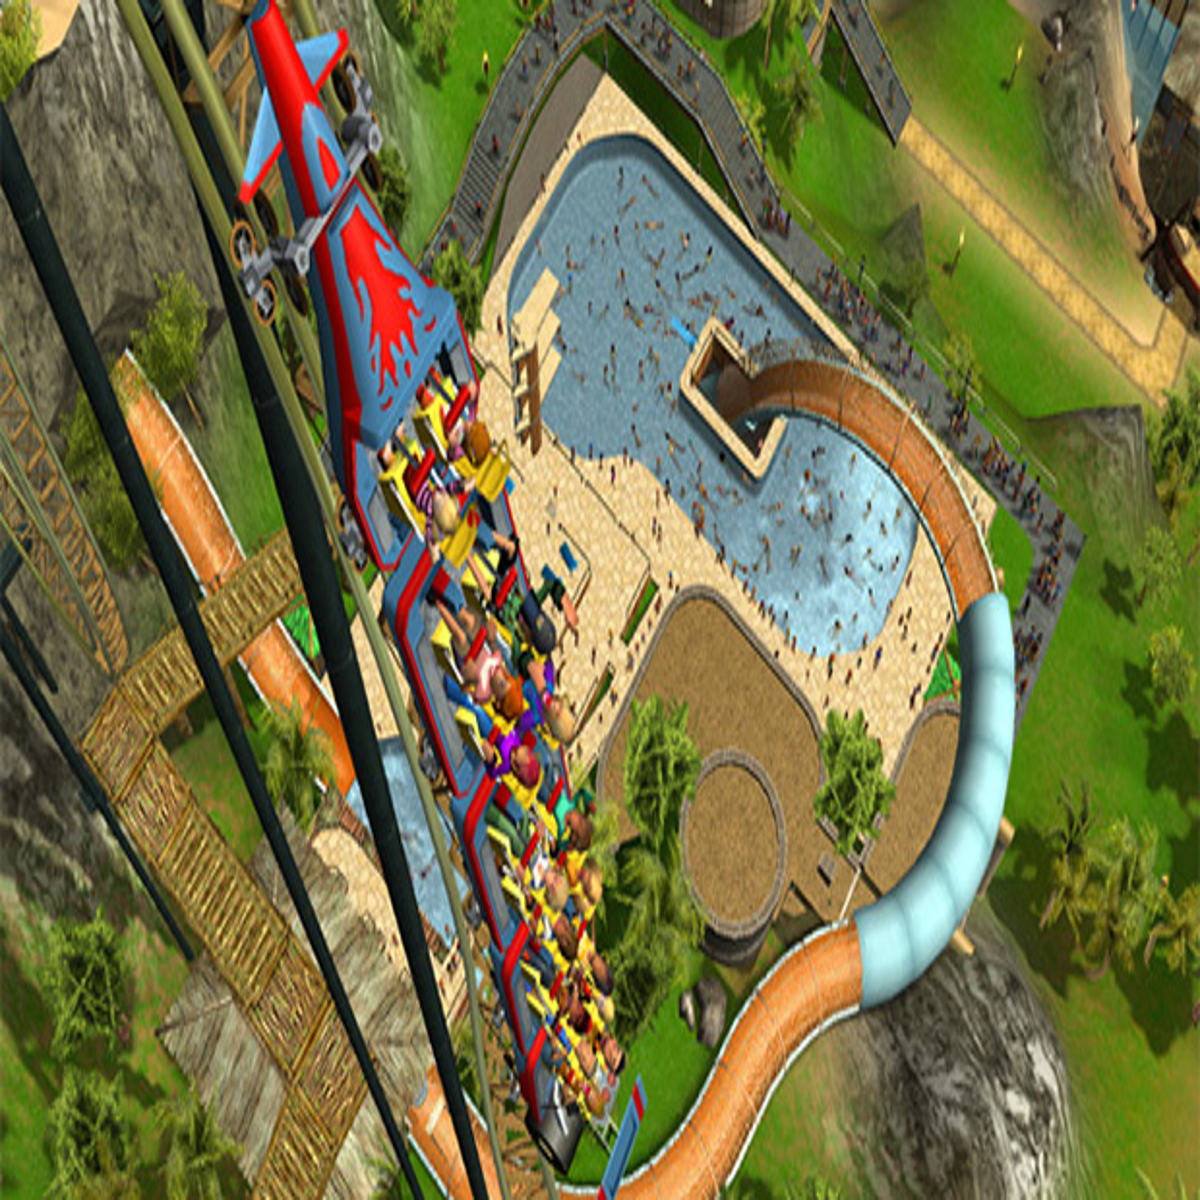 RollerCoaster Tycoon 3: Complete Edition [Mac]